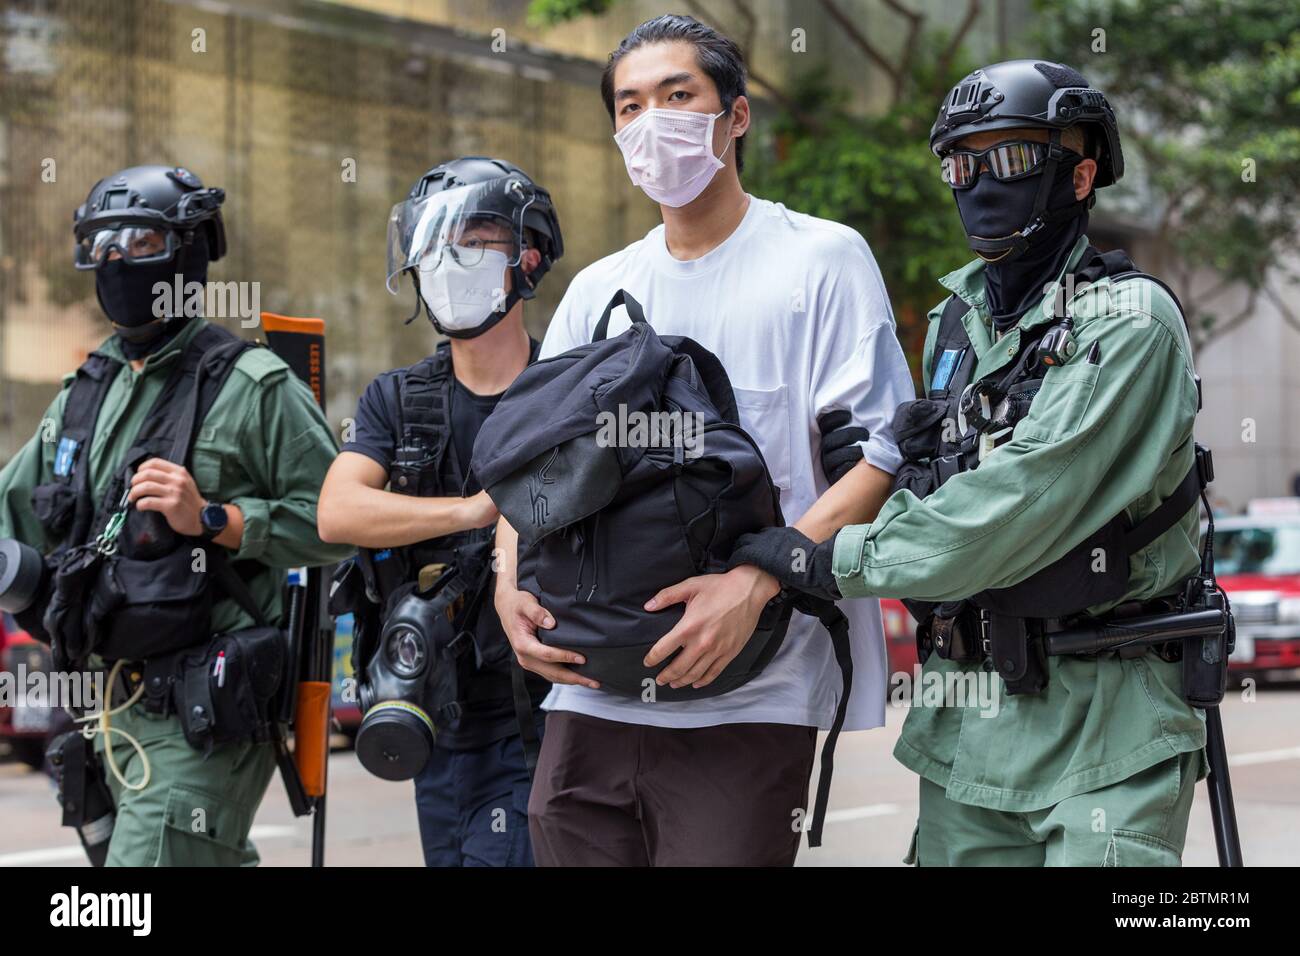 Central, Hong Kong. 27 May, 2020 Hong Kong Protest Anti-National Anthem Law. Police taking an arrested individual to the police van. Credit: David Ogg / Alamy Live News Stock Photo